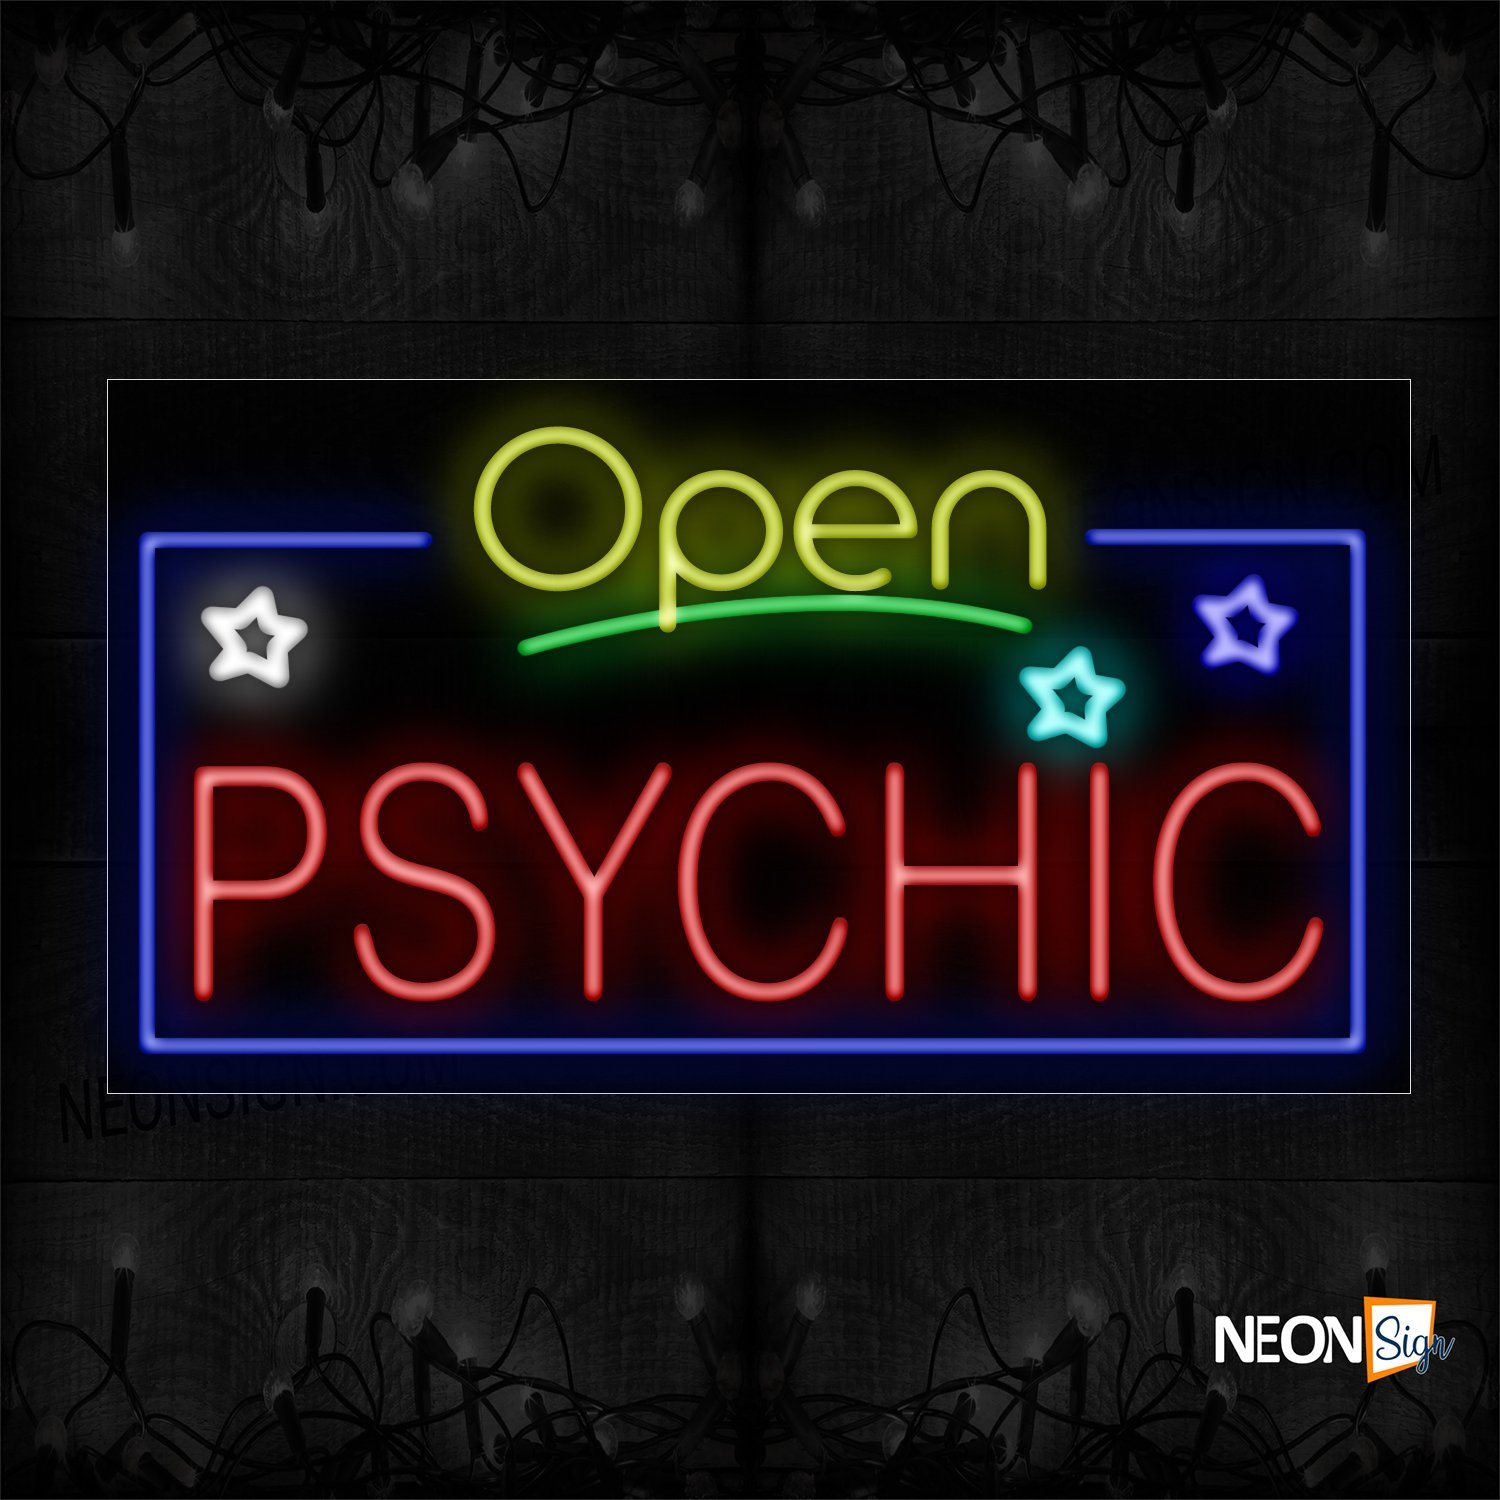 Image of 15561 Open Psychic With Border And Star Logo Neon Sign_20x37 Black Backing